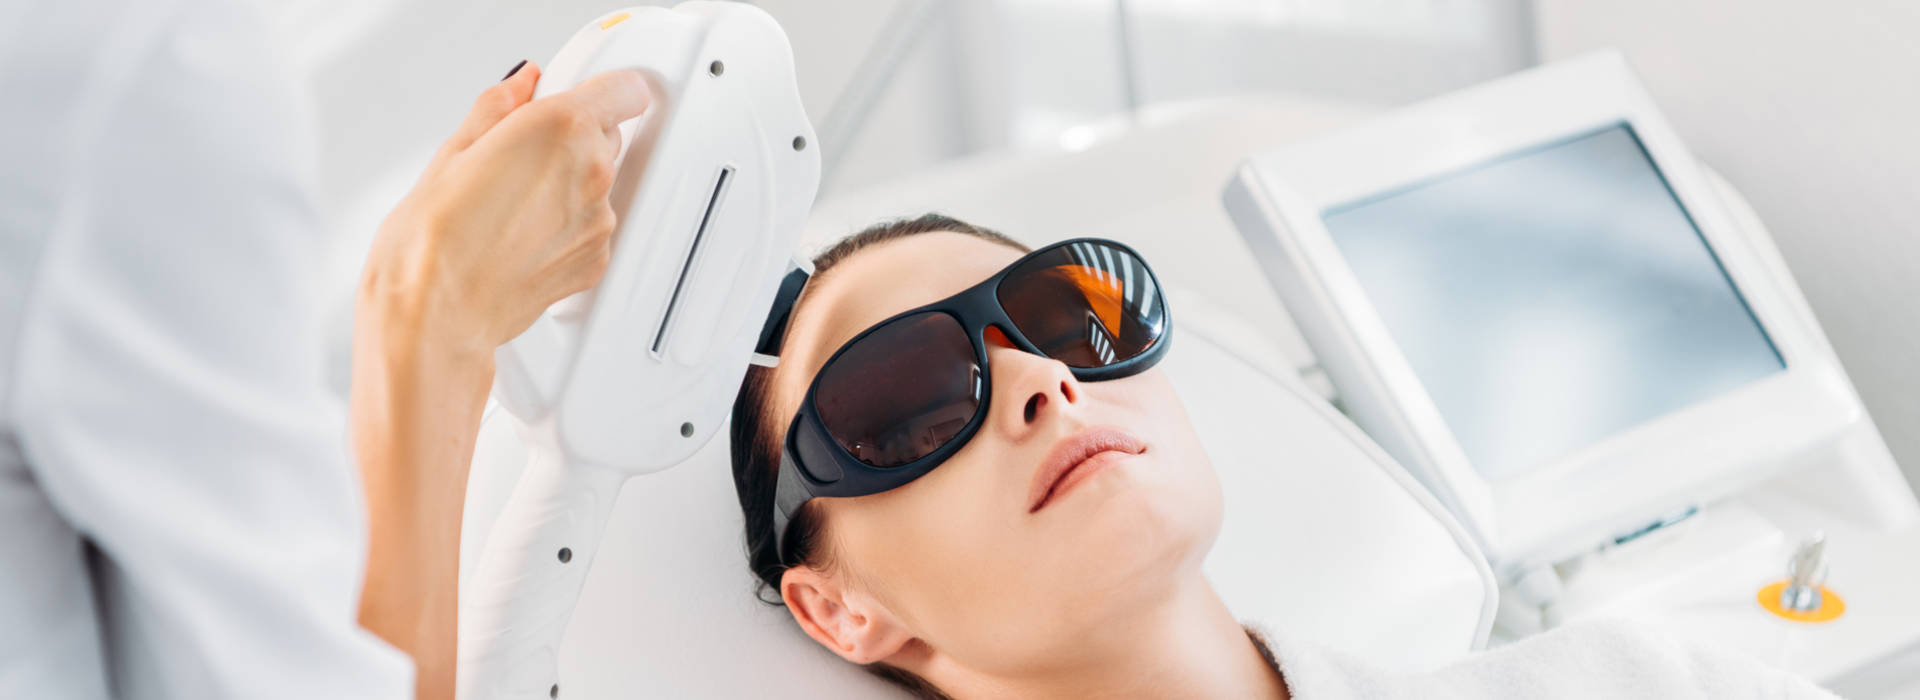 A beautiful woman is having laser treatments.